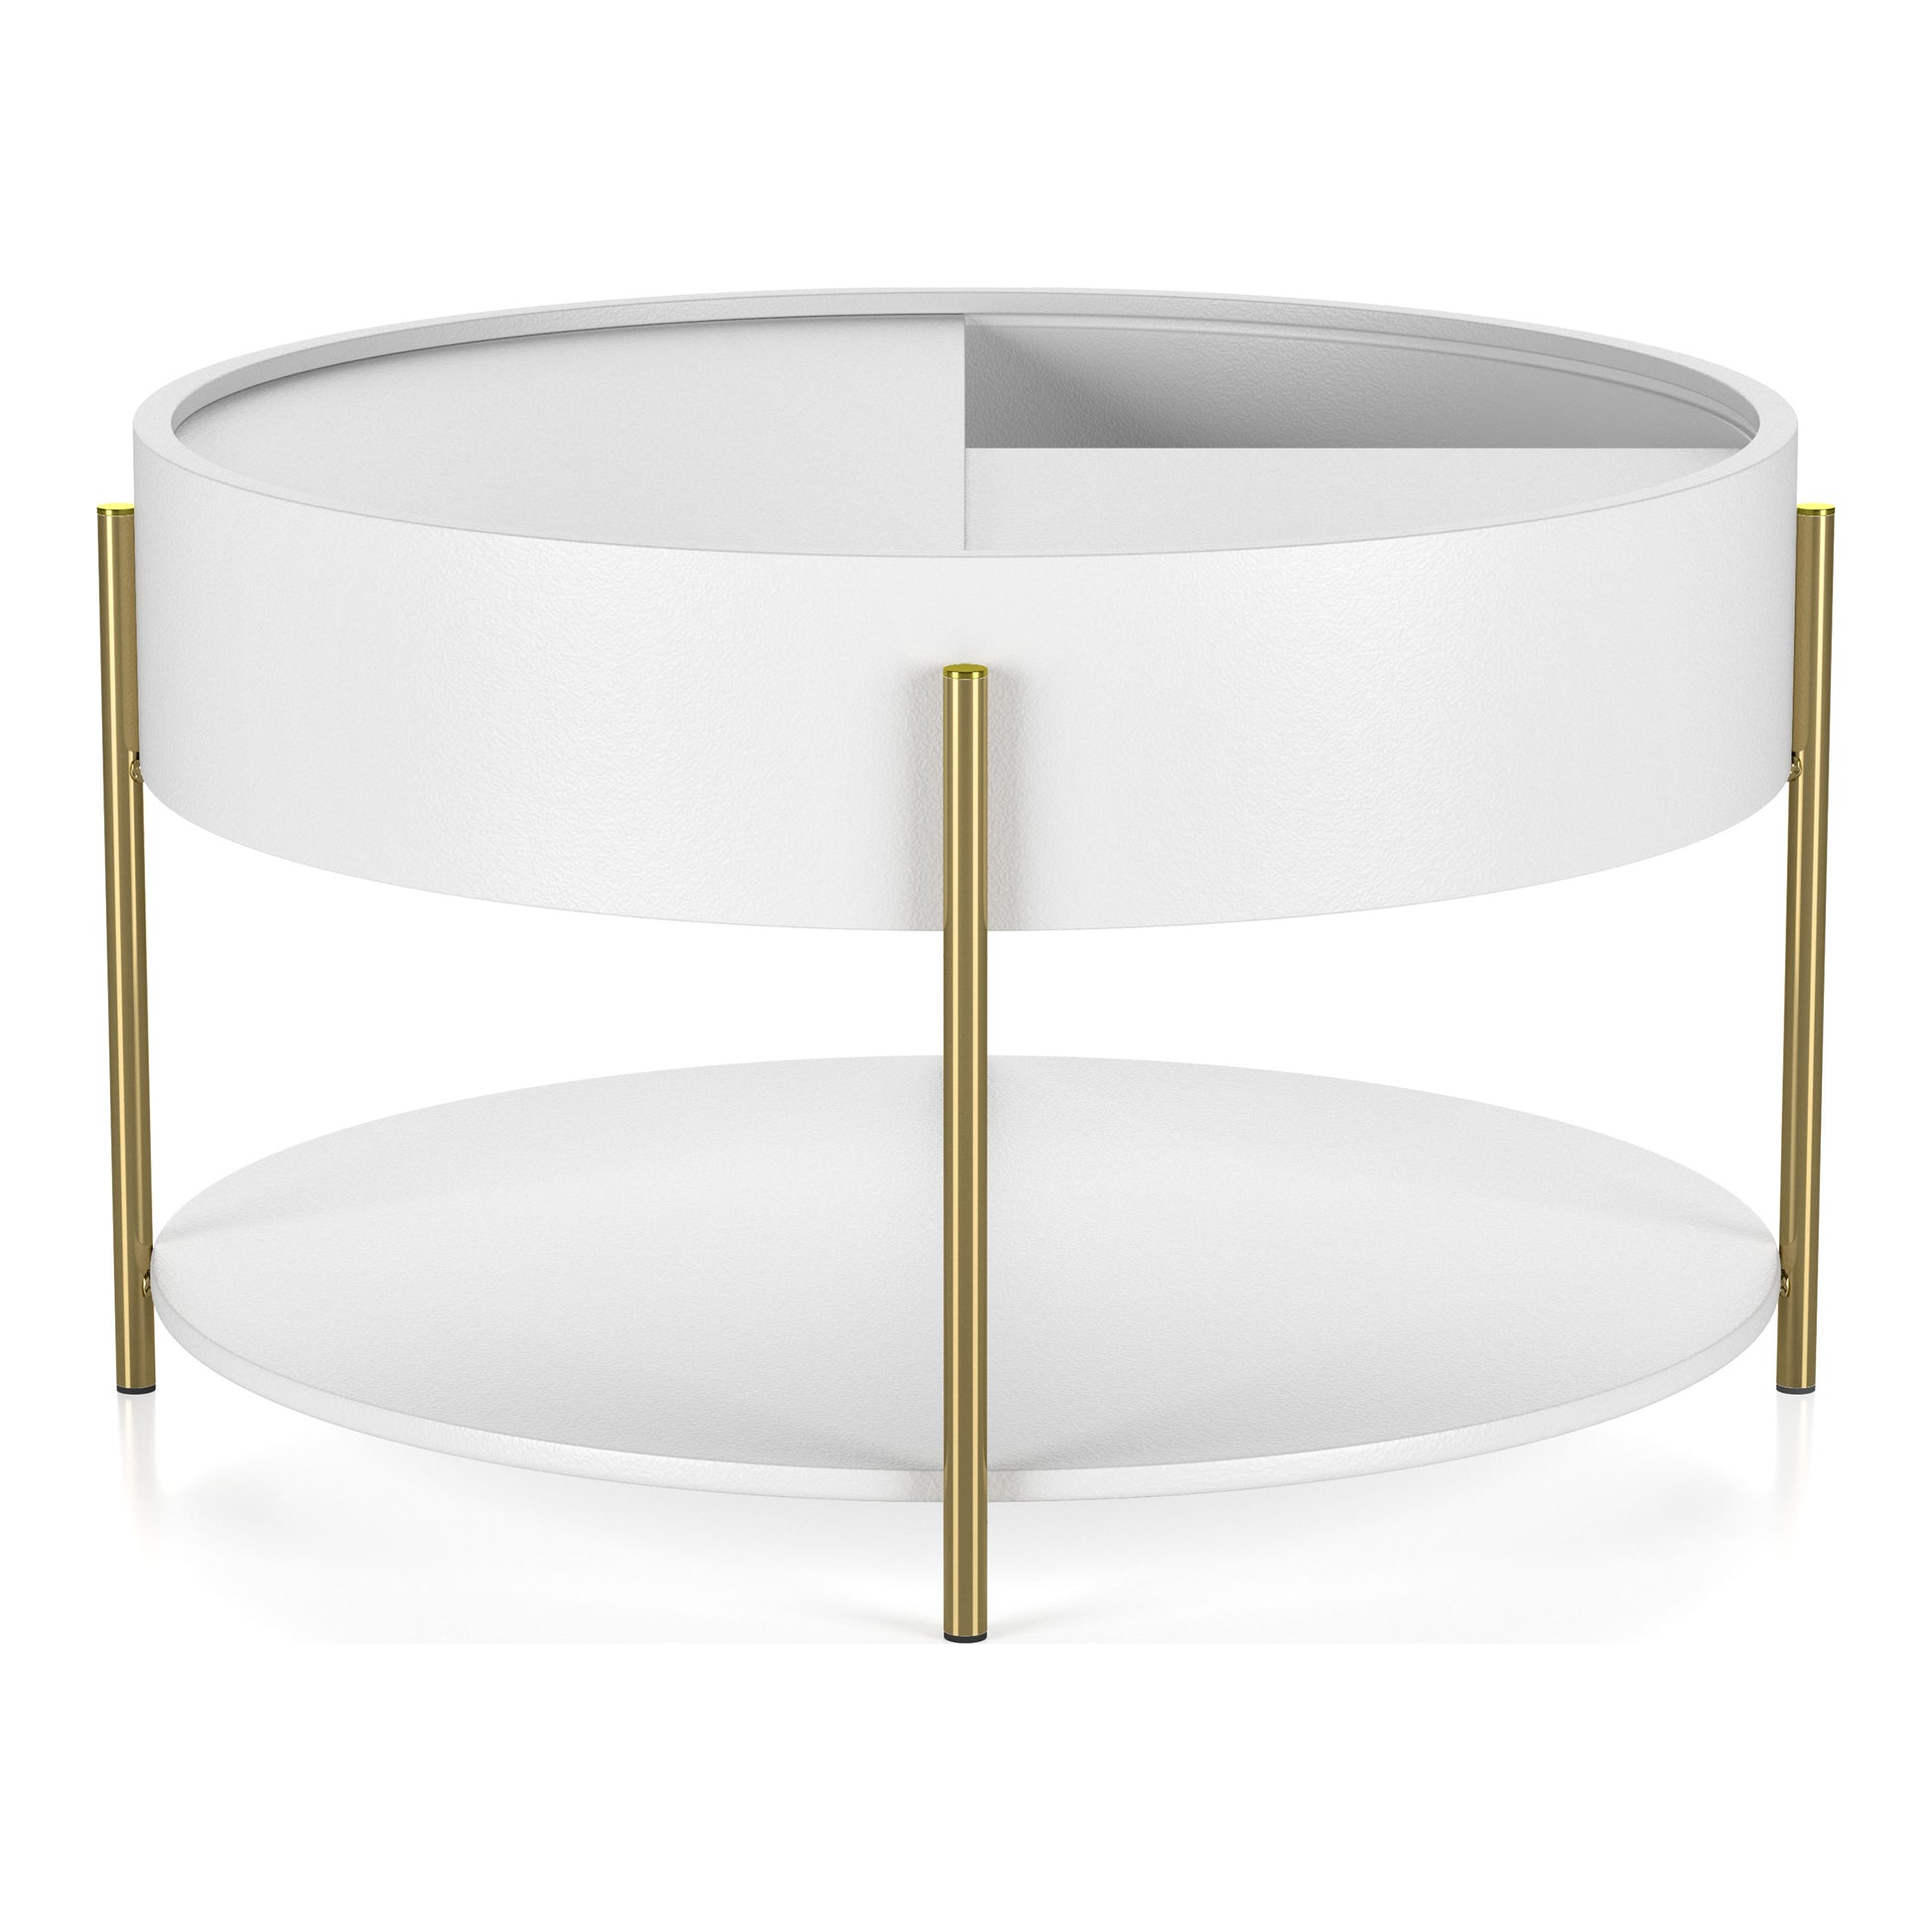 Angled modern white and gold round storage coffee table with top partially open on a white background